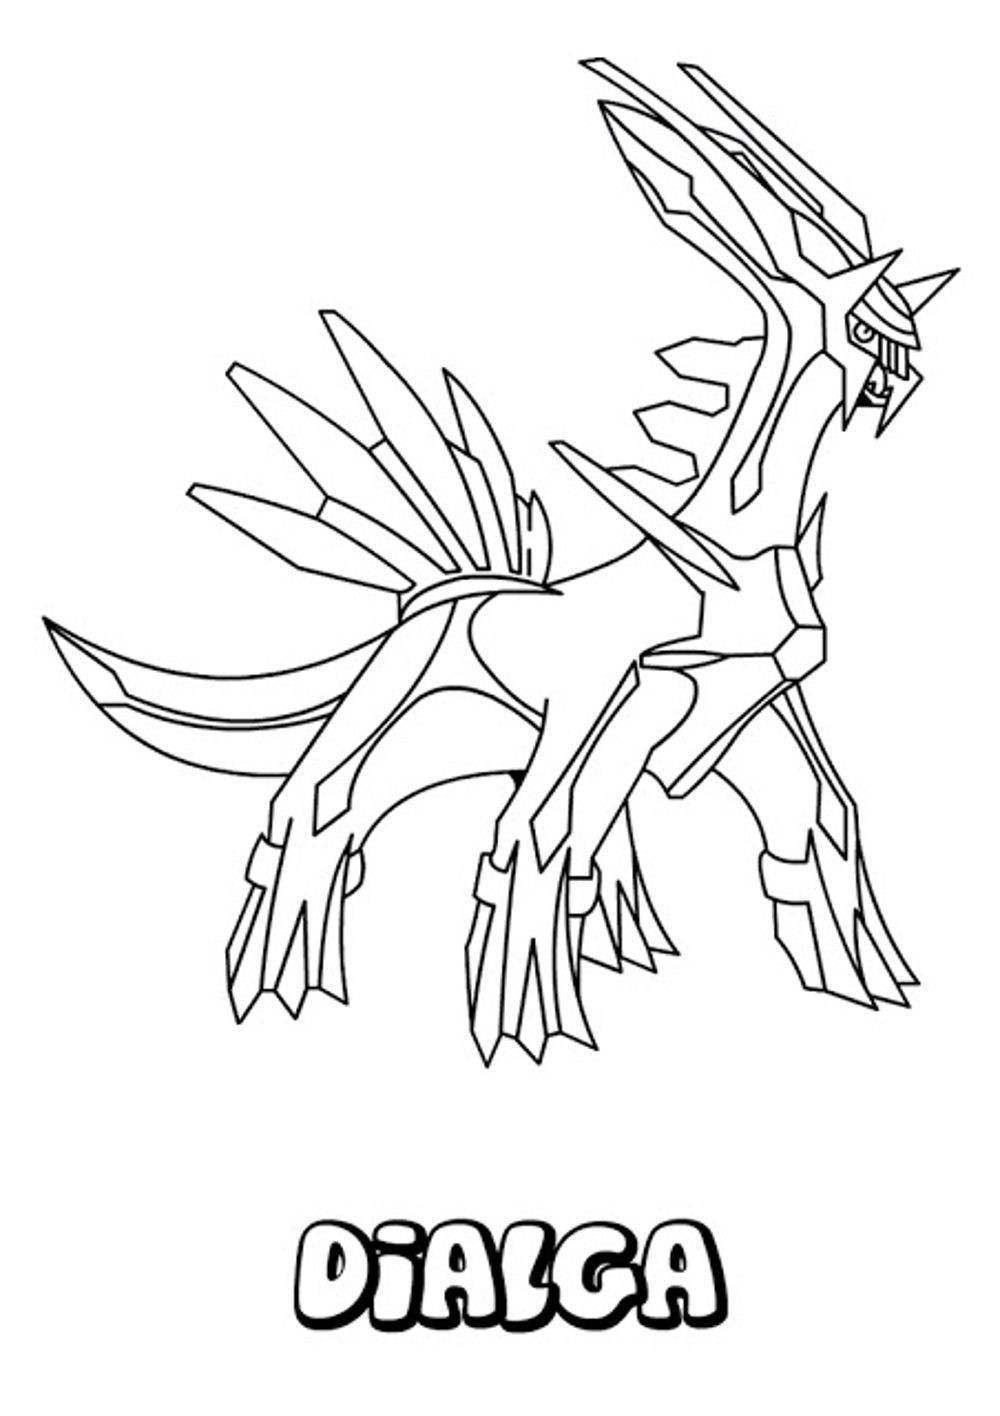 Coloring Pages For Boys Pokemon
 Print & Download Pokemon Coloring Pages for Your Boys